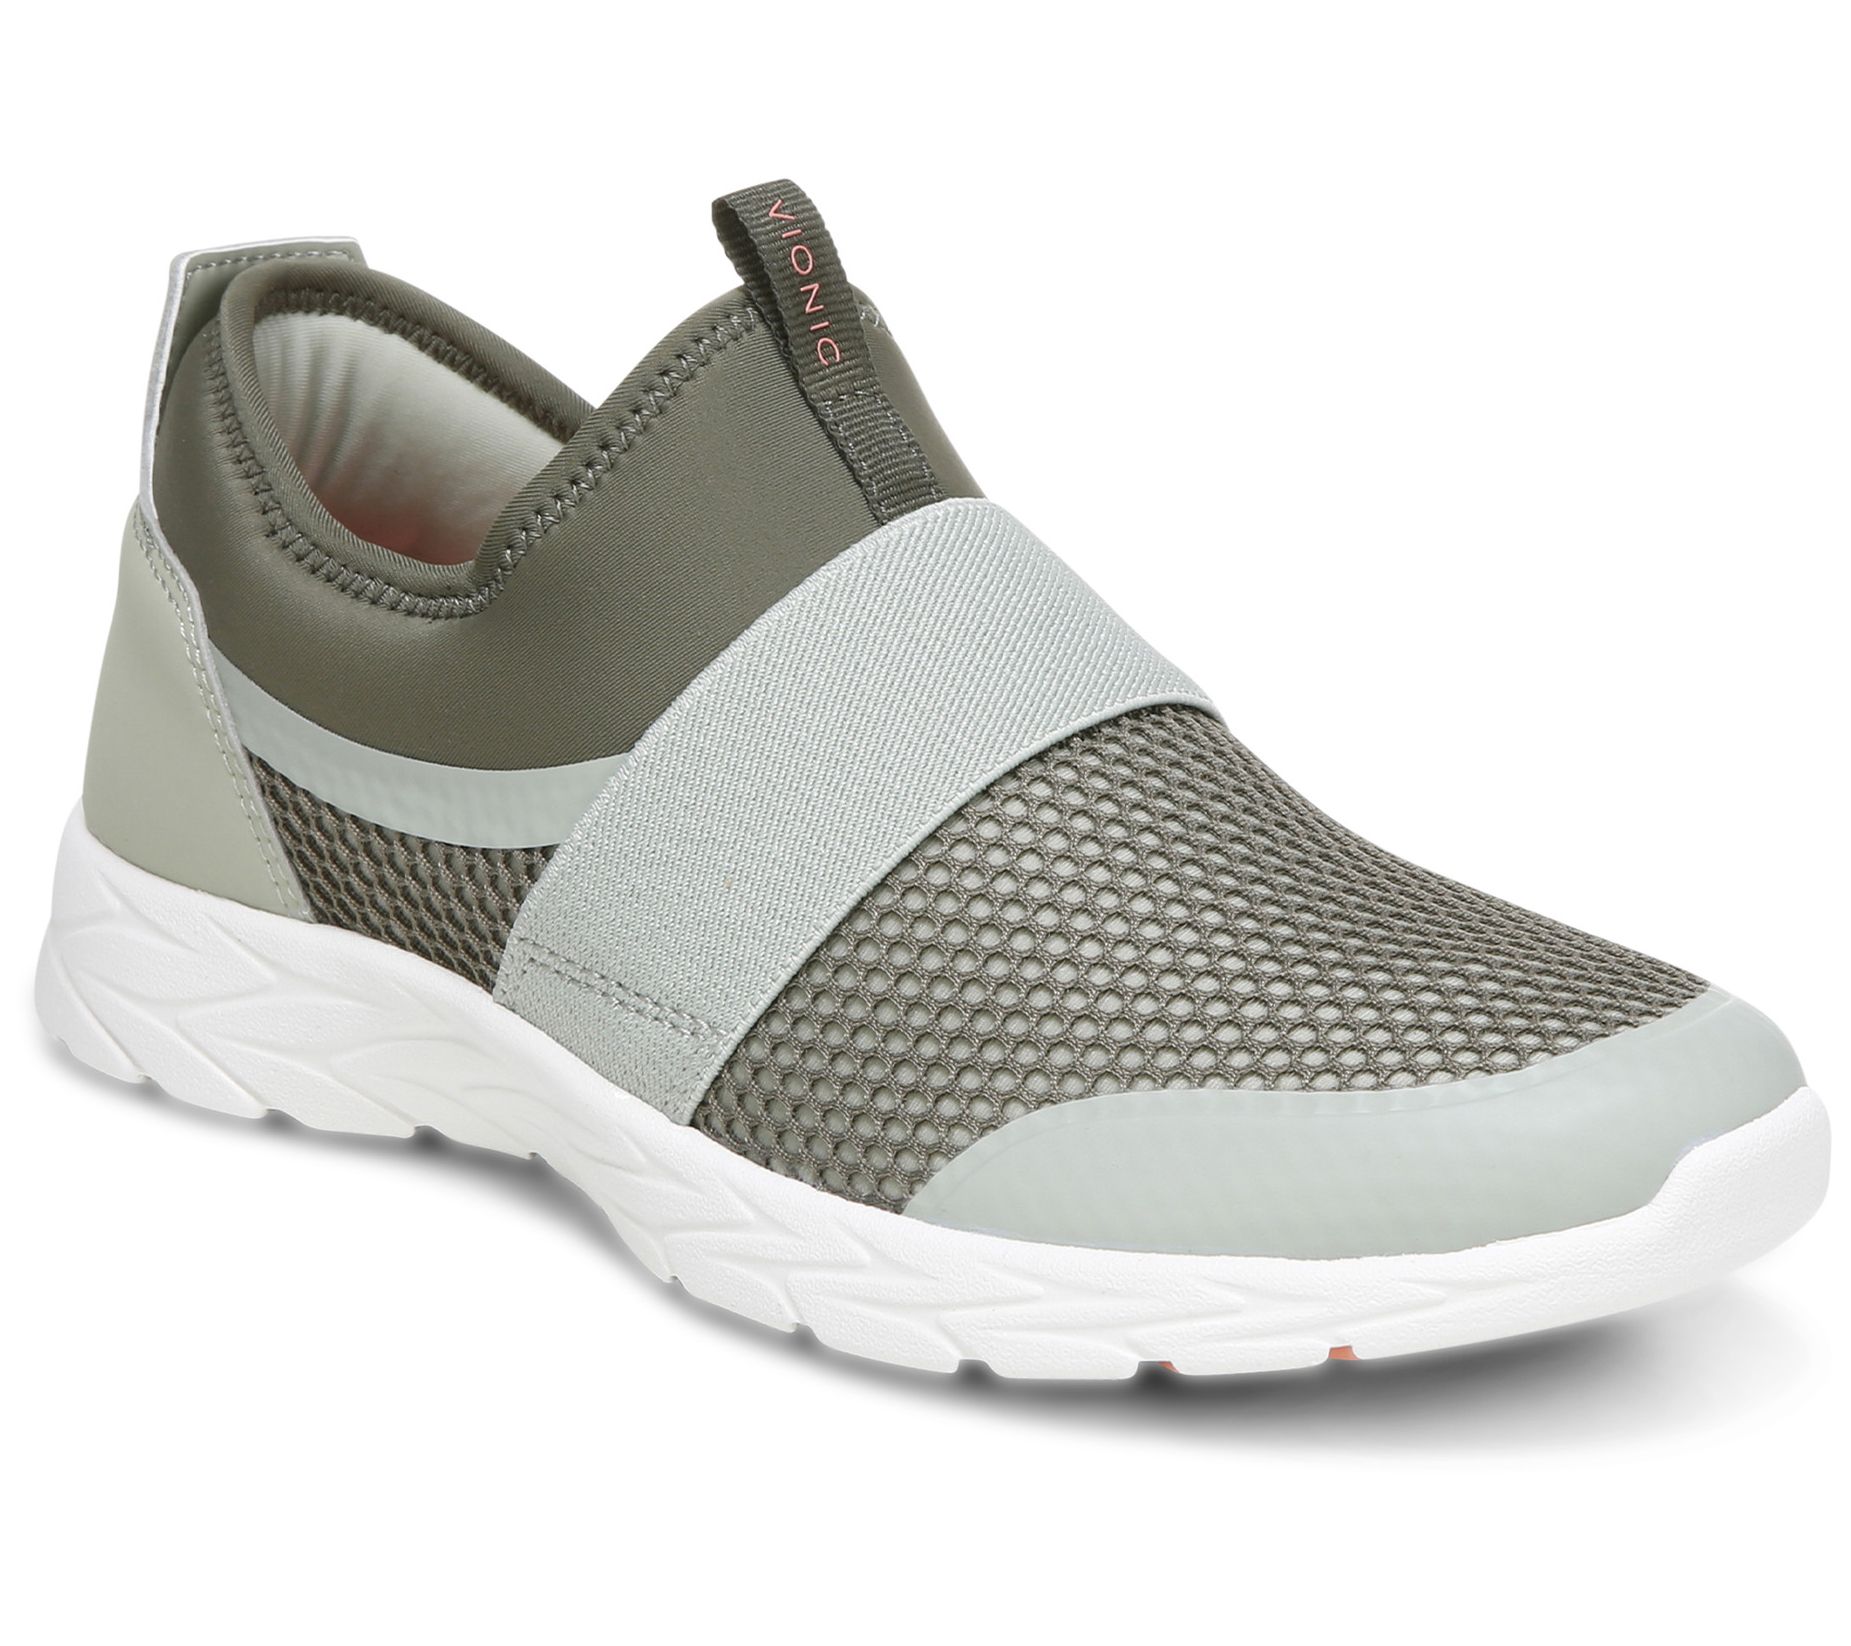 Vionic Mesh Athletic Sneakers -Camrie QVC.com